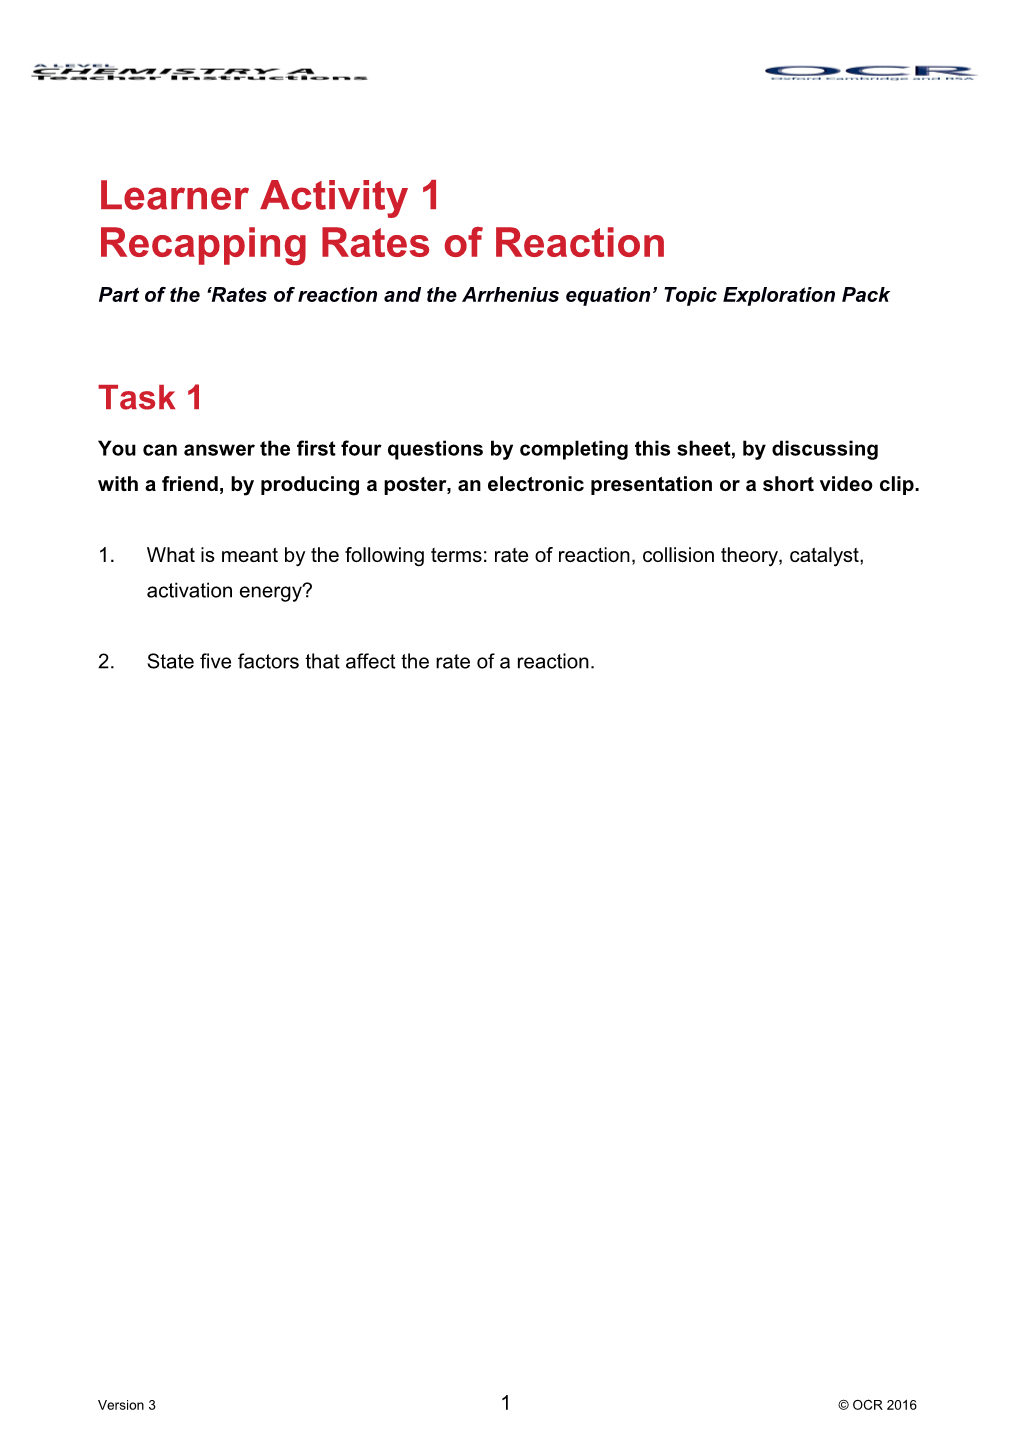 A Level Chemistry a Topic Exploration Pack (Rates of Reaction)